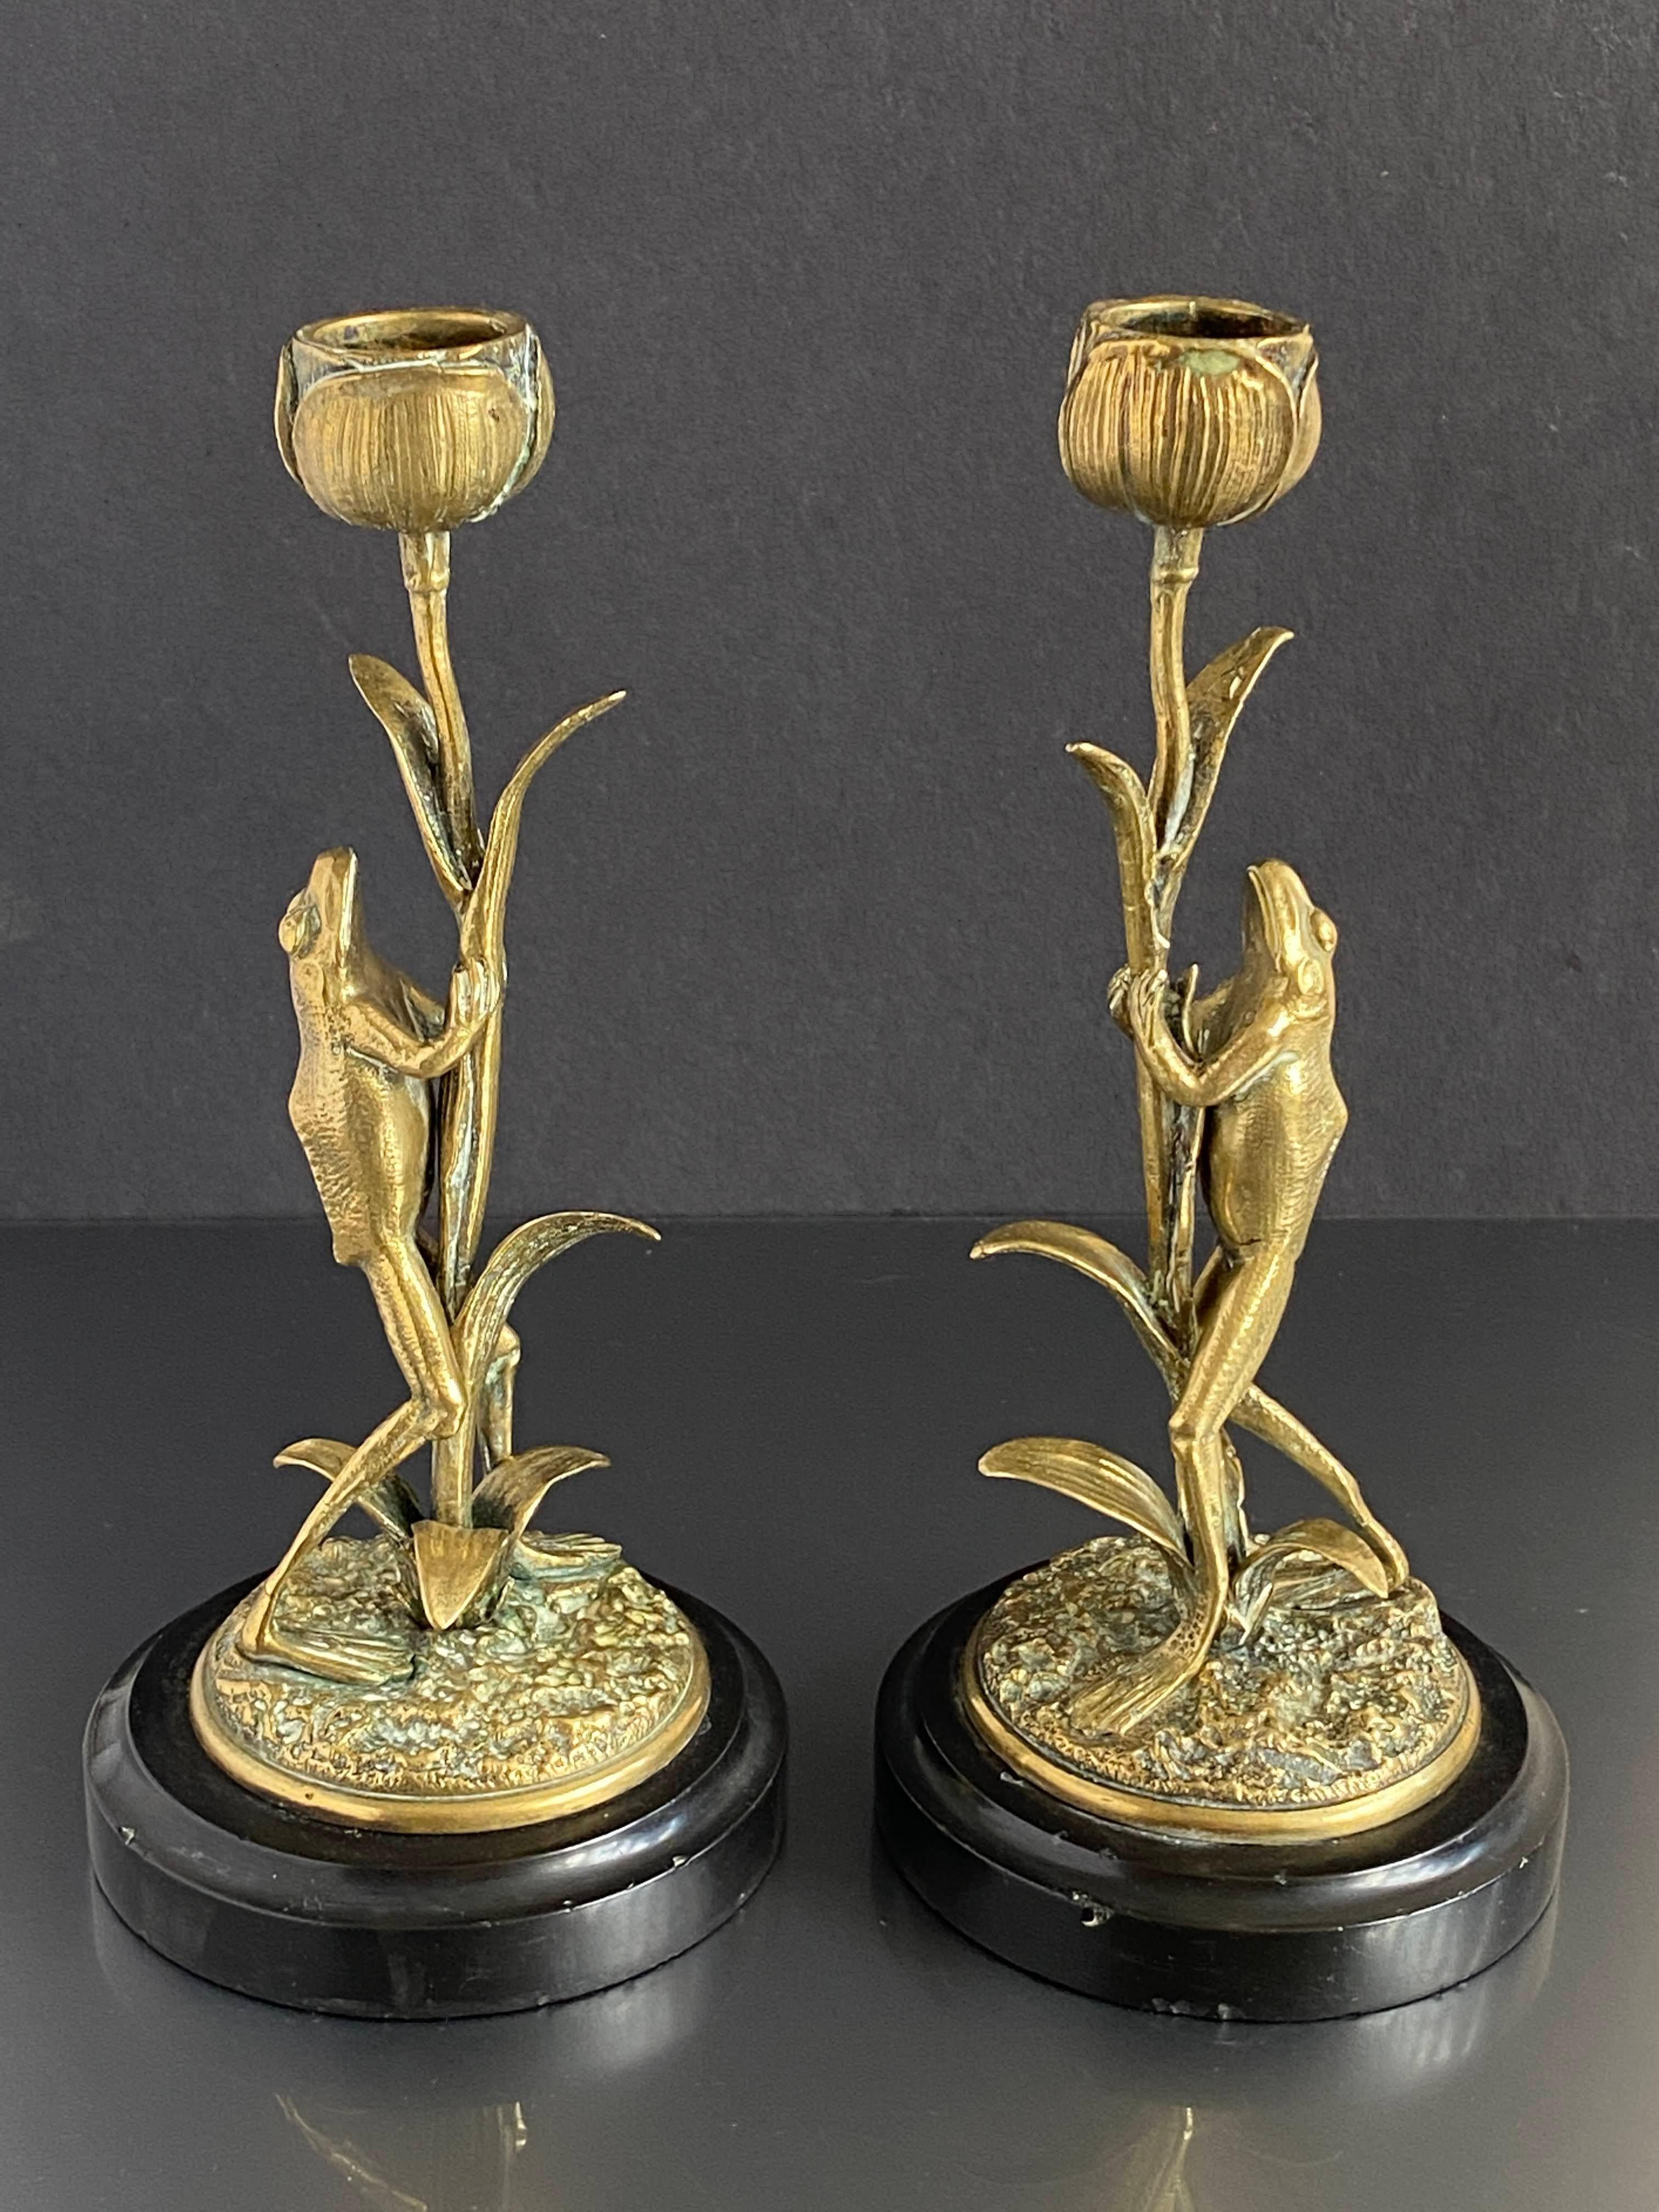 An unusual pair of Art Noveau candlesticks modelled as frogs climbing lotus flowers on a black circular marble base. In good condition with wear appropriate for its age, circa 1890, origin unknown.